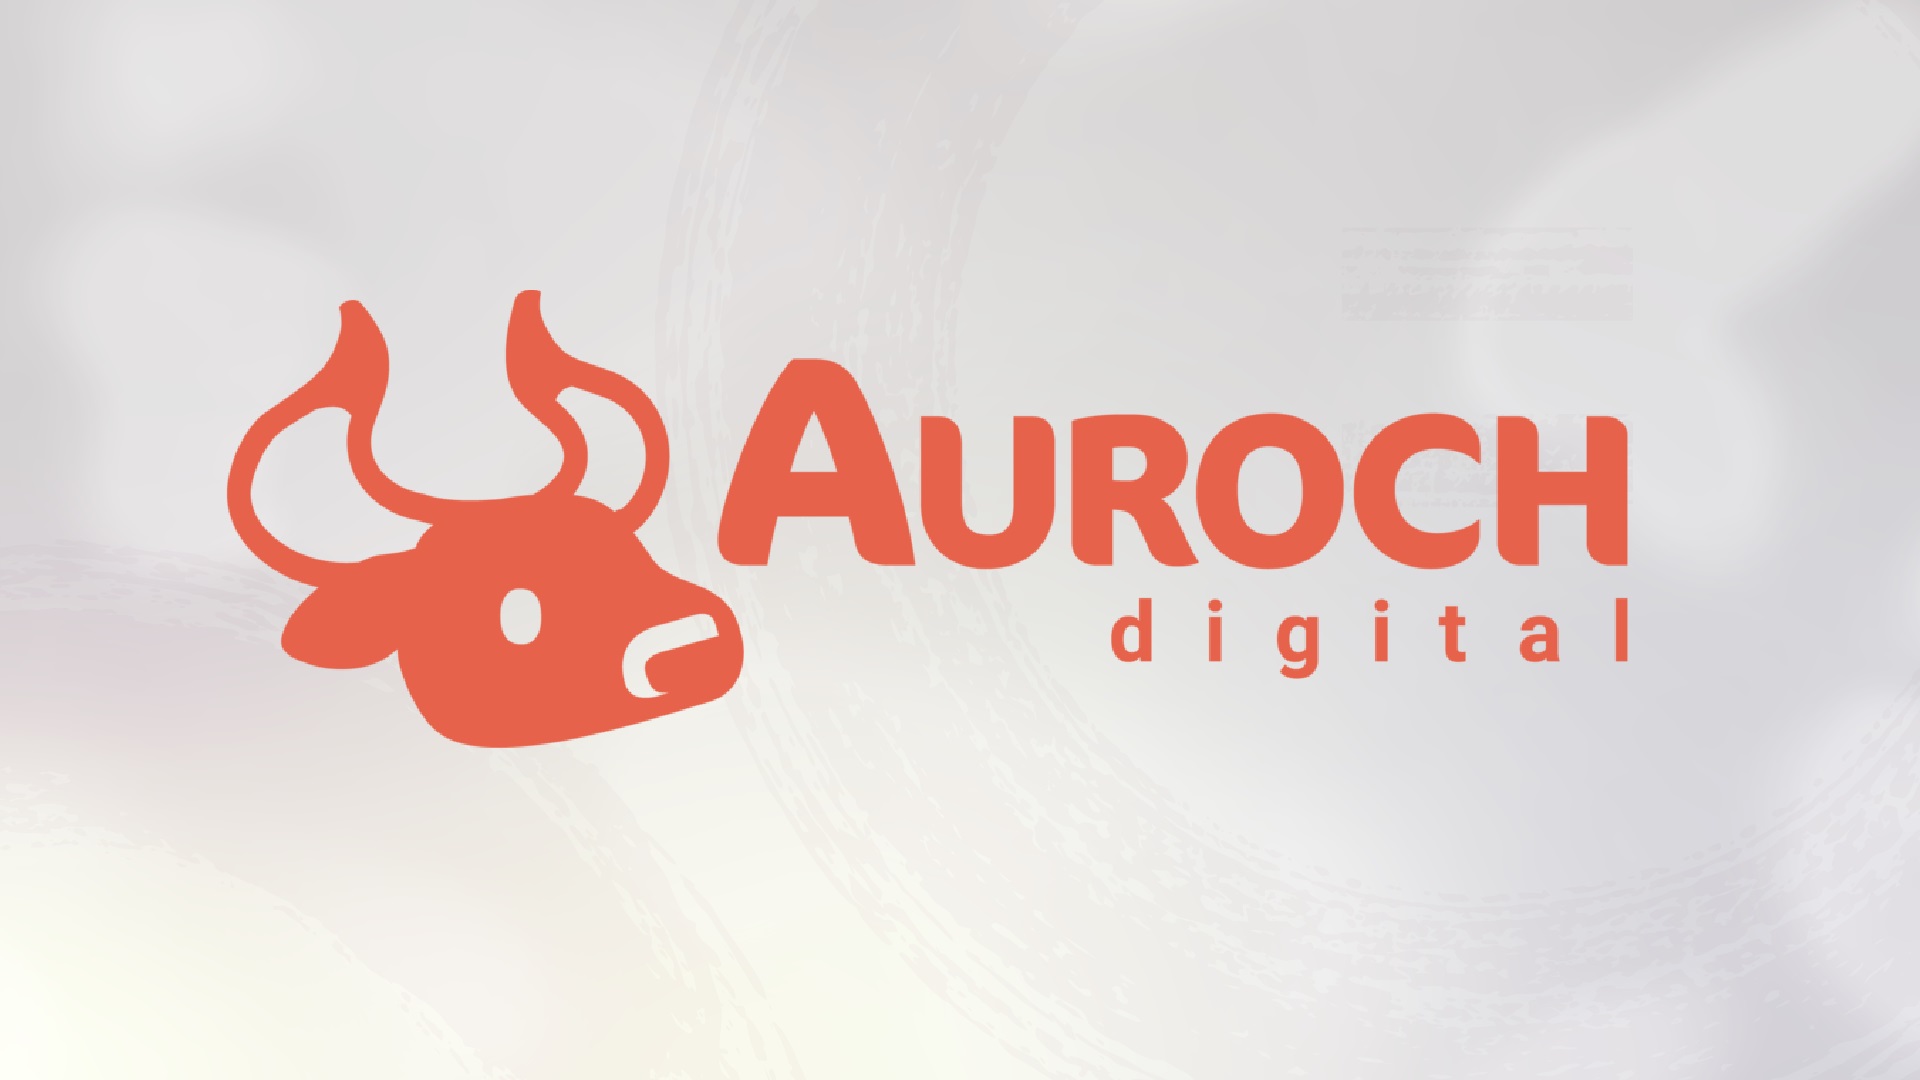 Sumo Group has Acquired Auroch Digital